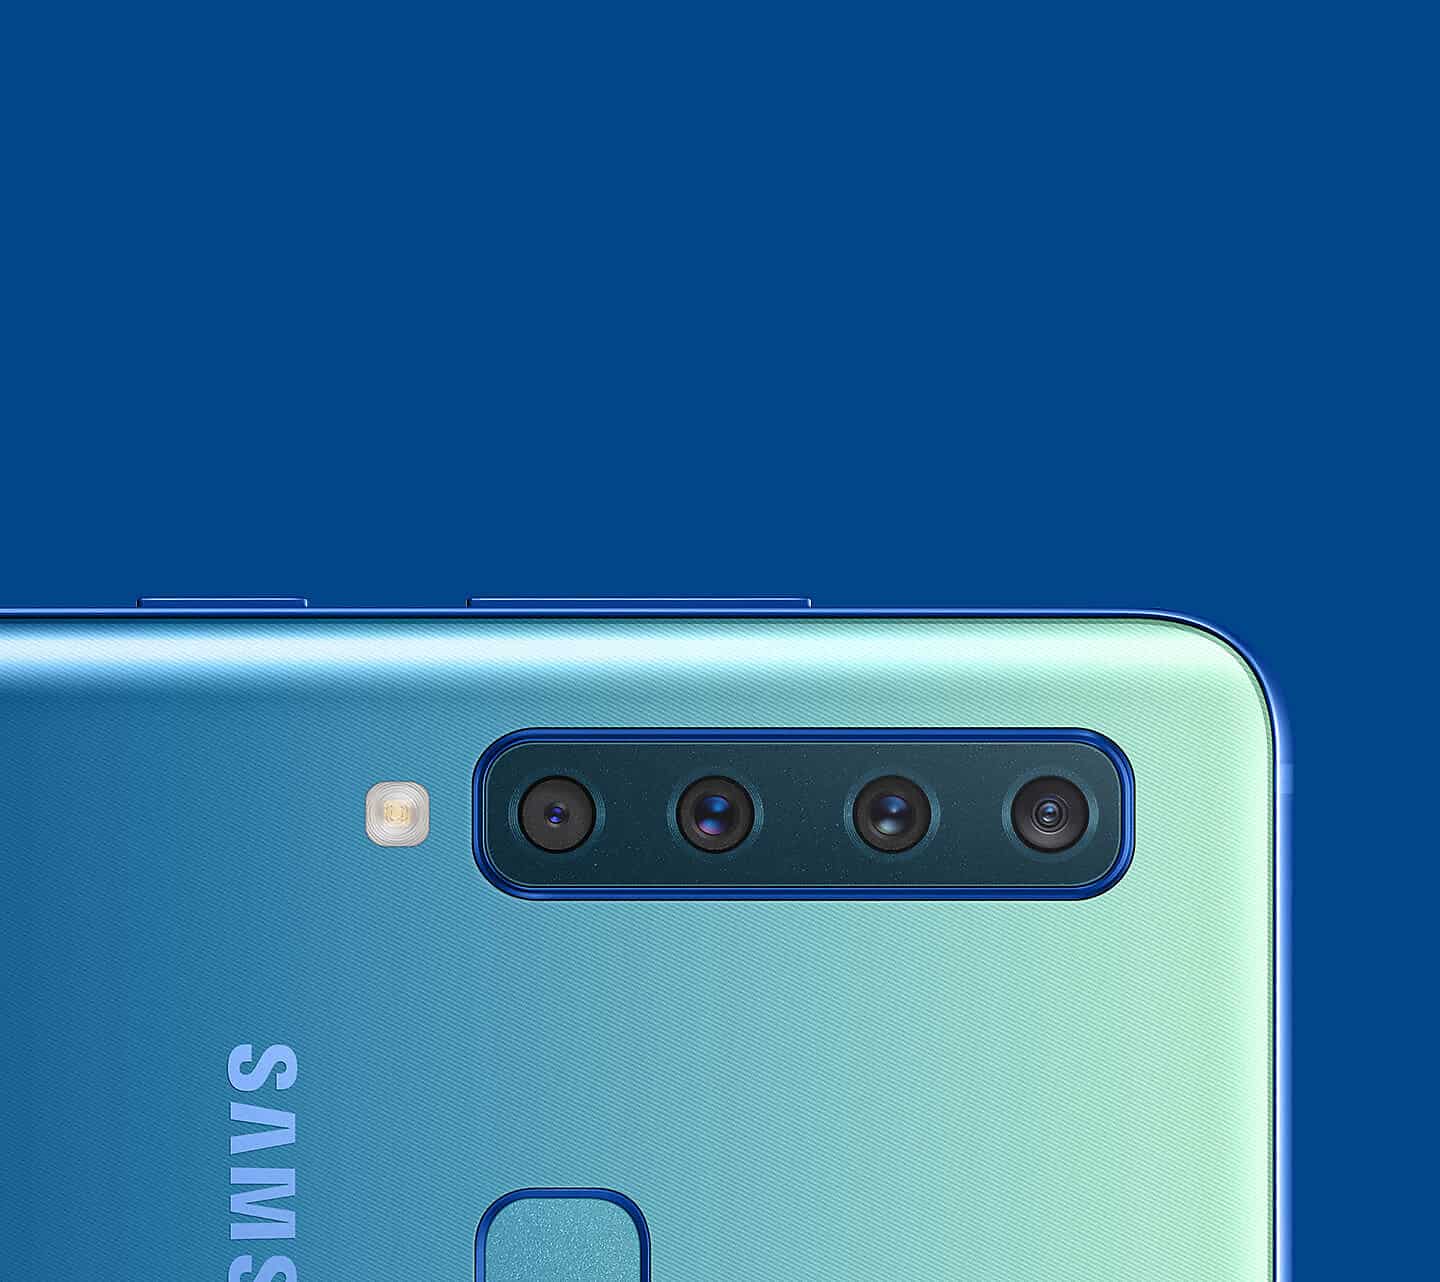 Samsung Galaxy A9: World's First Phone With 4-rear cameras